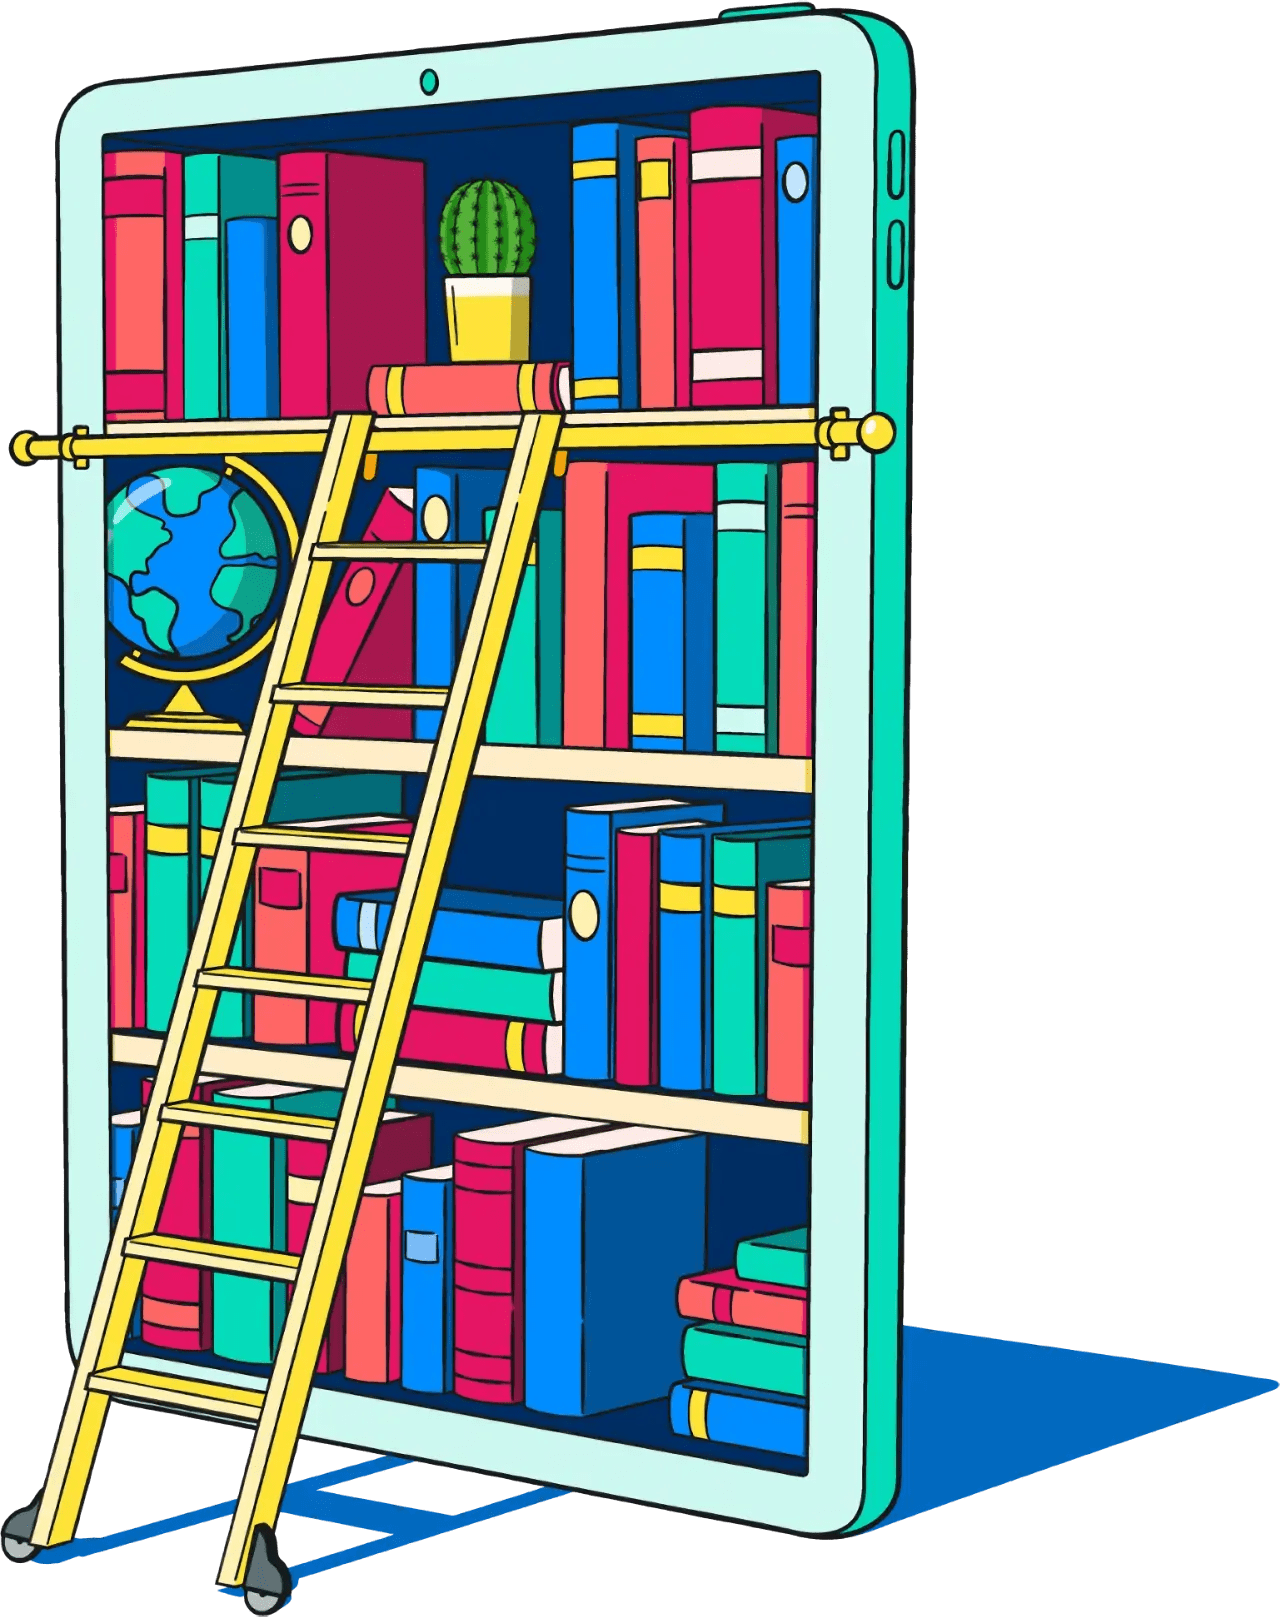 A bookshelf filled with neatly stacked books of various sizes and colours. The bookshelf is embedded within a mobile device frame. A ladder is attached to the bookshelf, giving access to the top shelves.